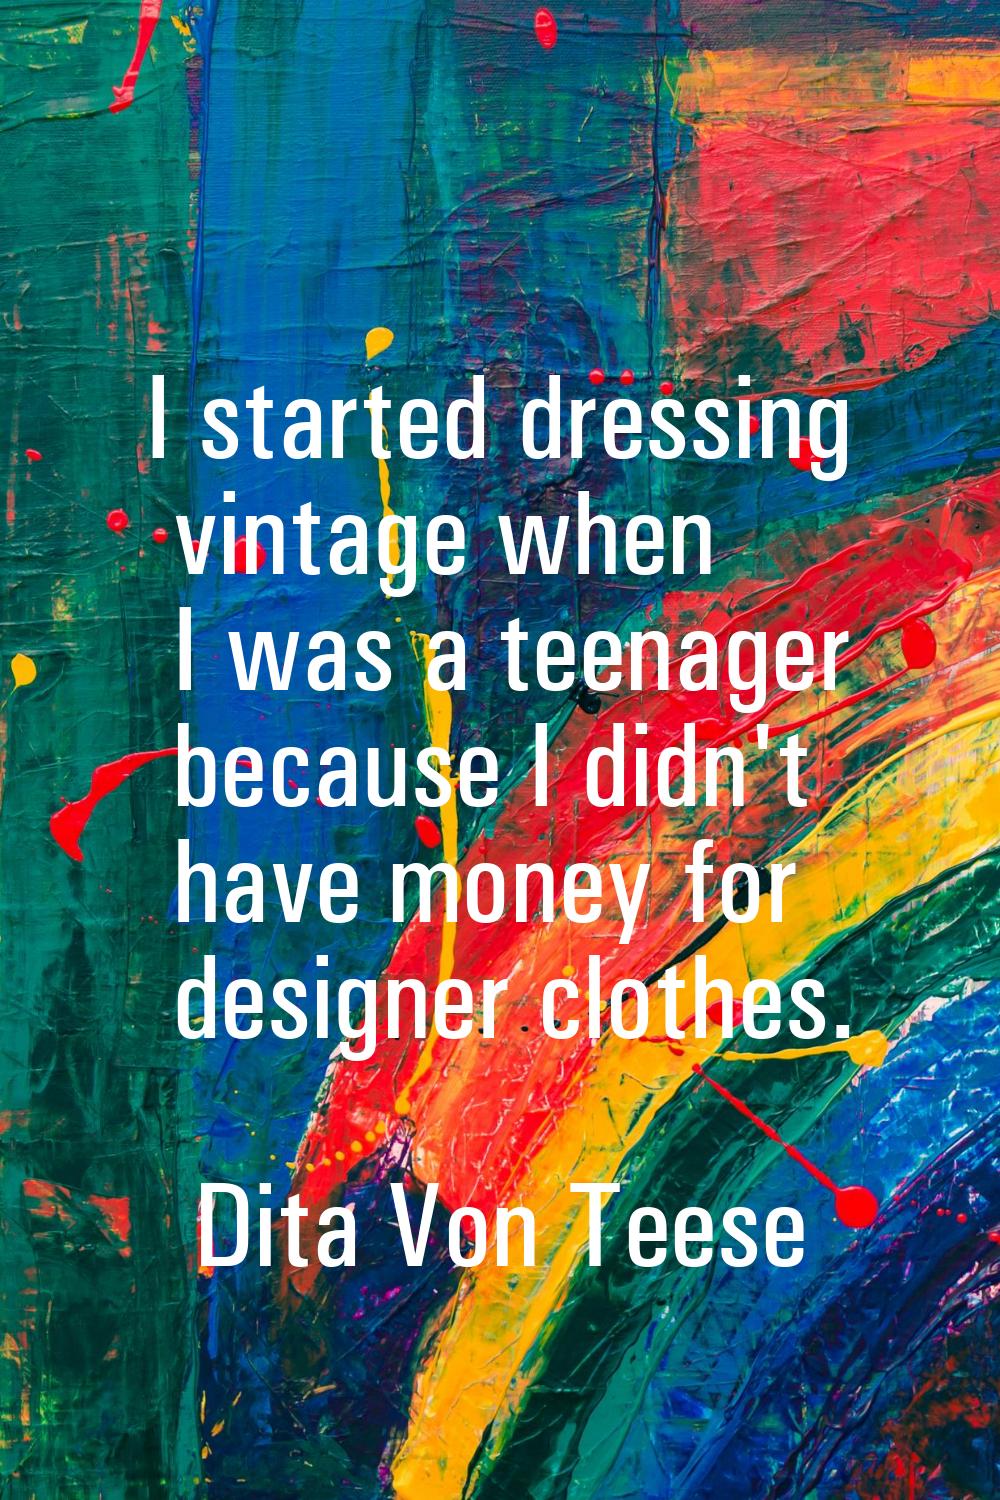 I started dressing vintage when I was a teenager because I didn't have money for designer clothes.